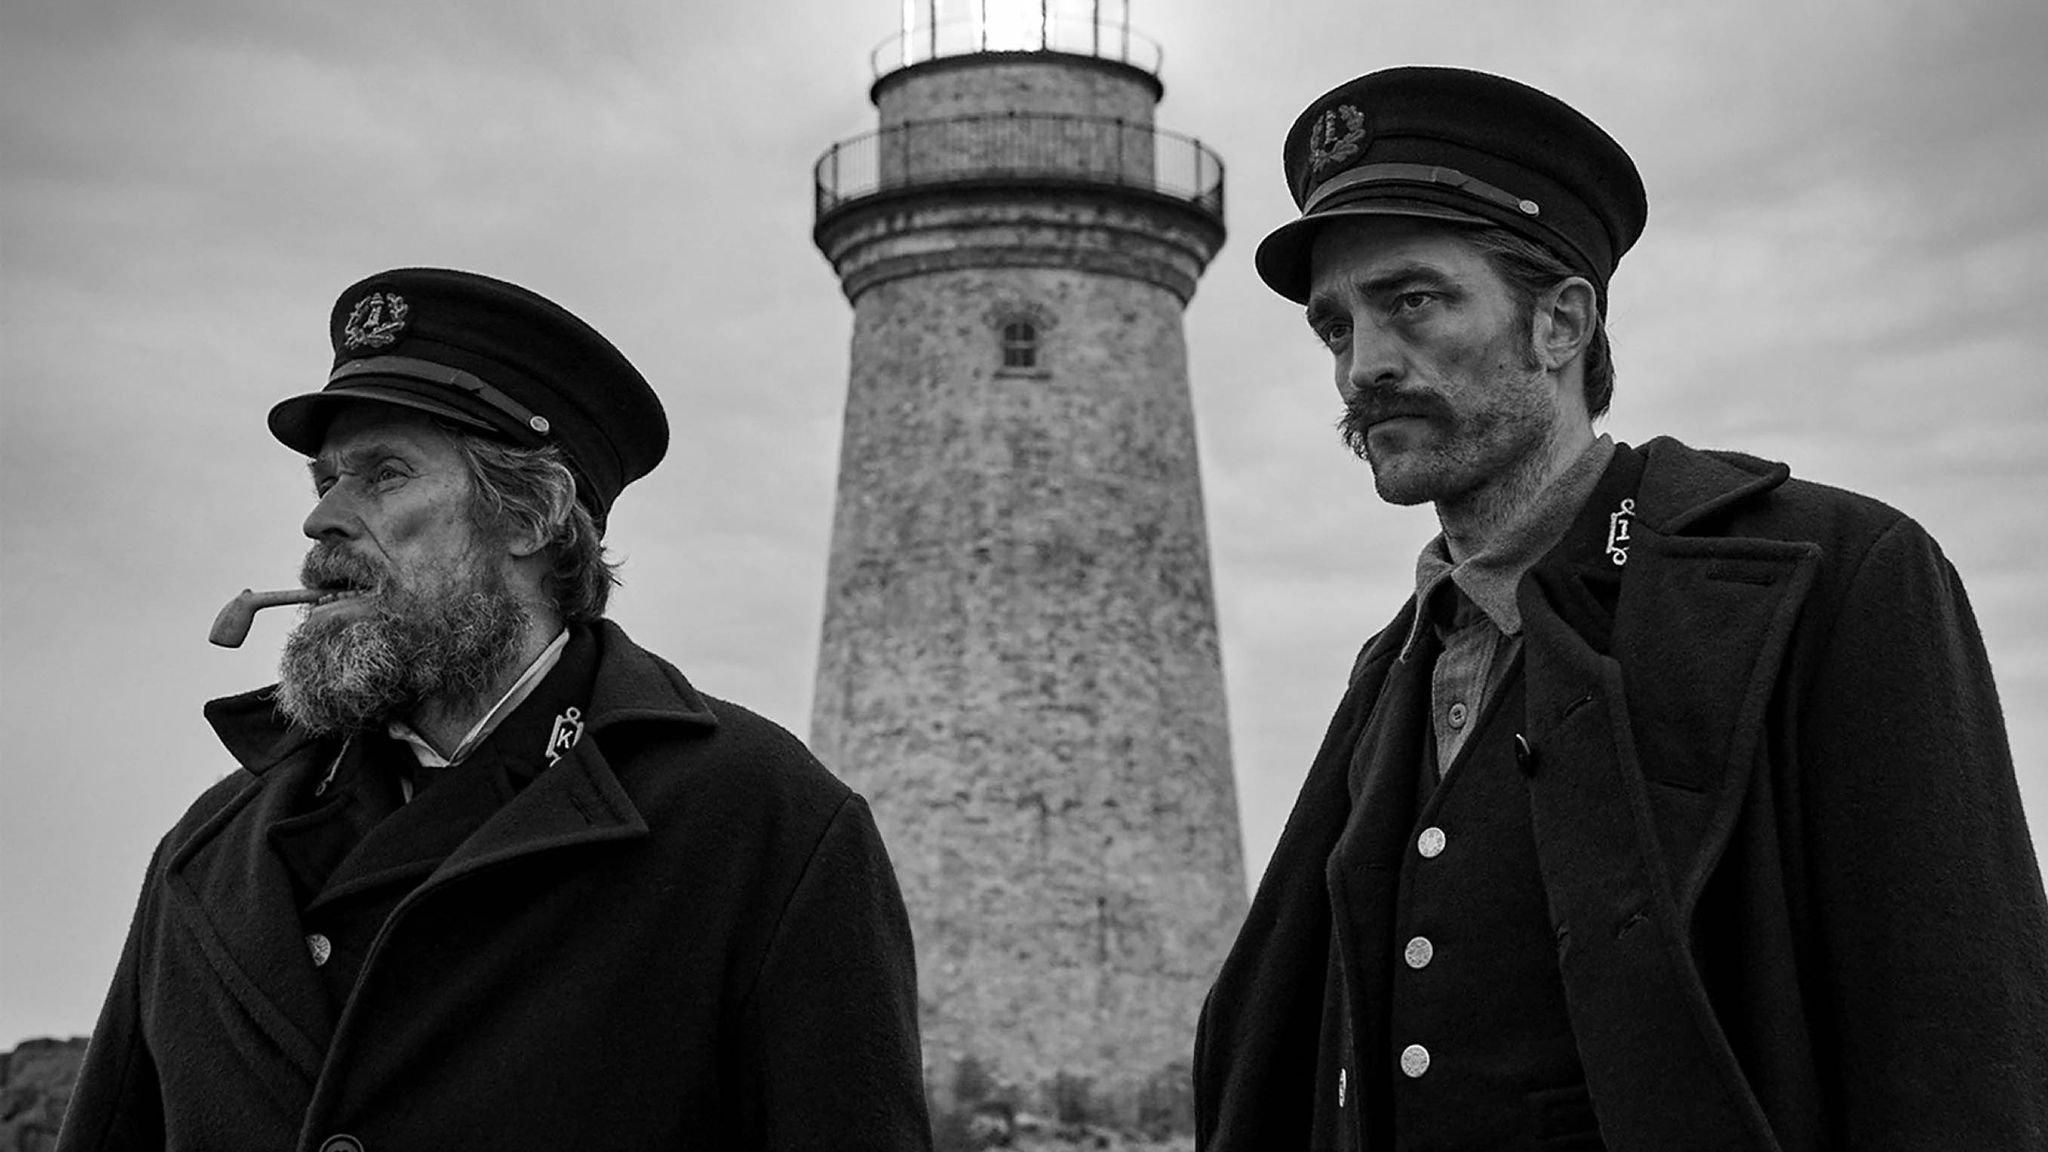 Cannes: The Lighthouse confirms director Robert Eggers as a